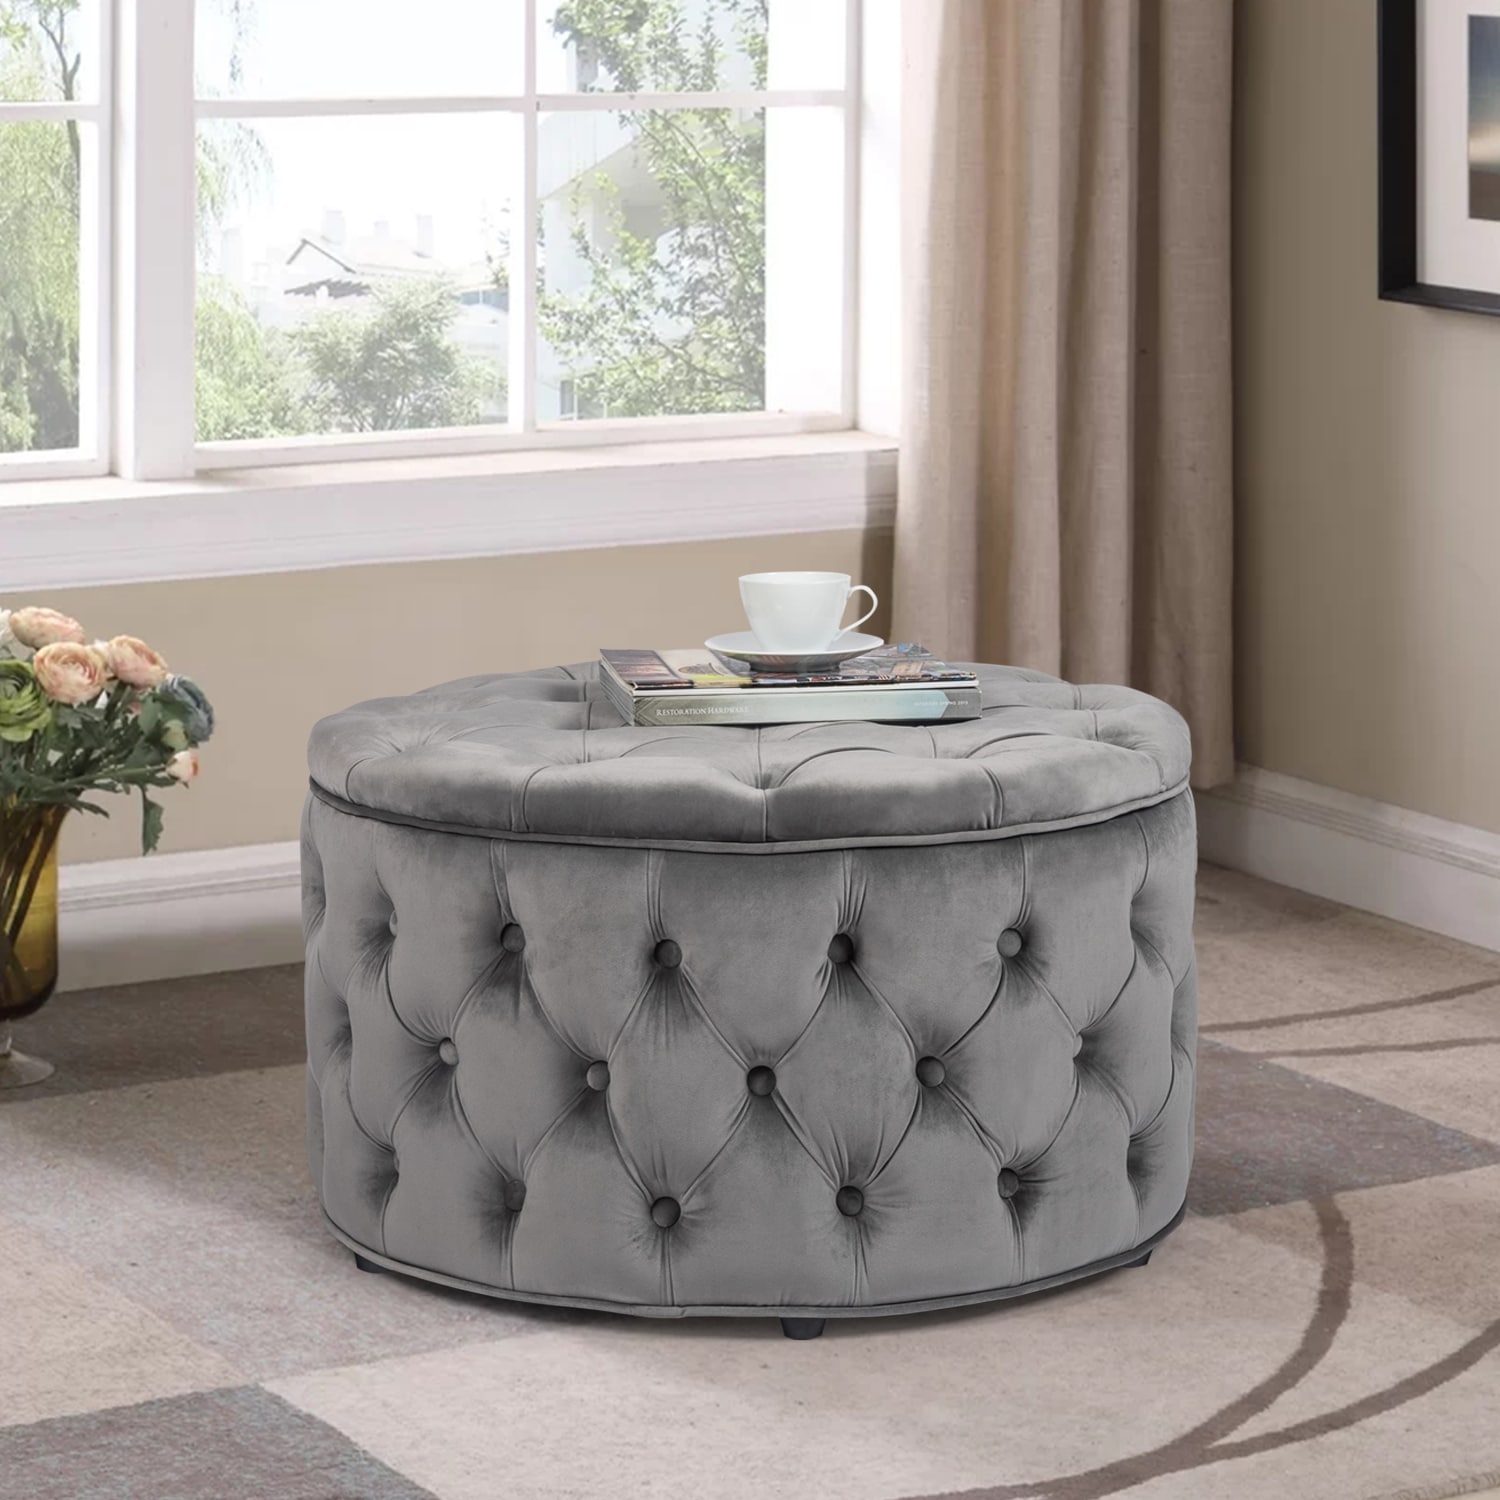 https://ak1.ostkcdn.com/images/products/is/images/direct/188e37d71ec01a93dbcc9a4ee7df7634e9c766ee/Adeco-Round-Storage-Ottoman-Button-Tufted-Footrest-Stool-Bench.jpg